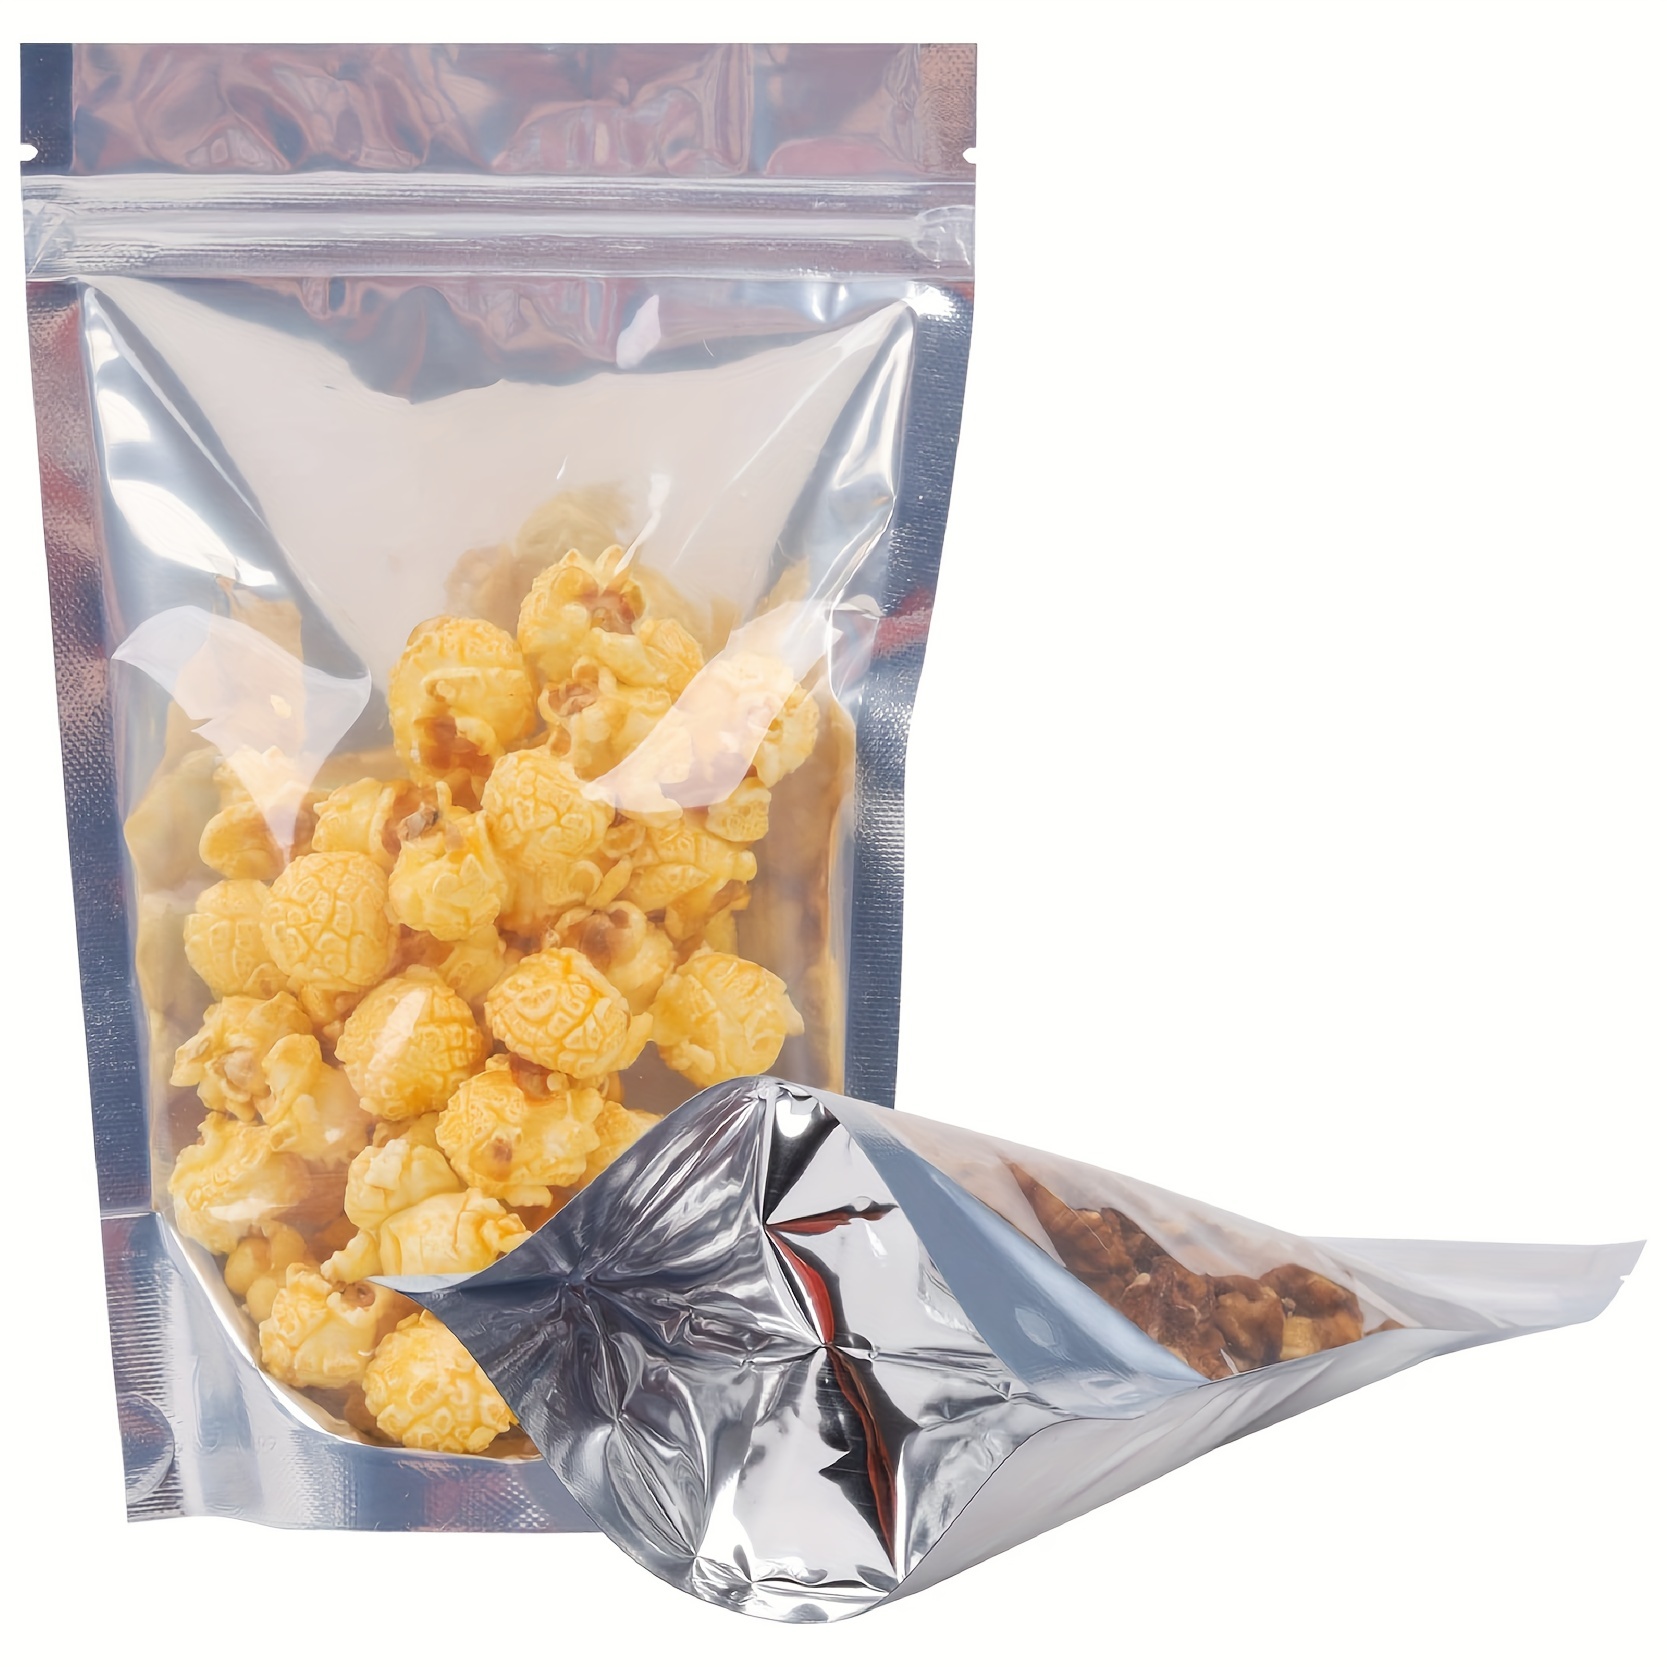 Sealable Mylar Bags With Ziplock For Candy, Food, Medications, And